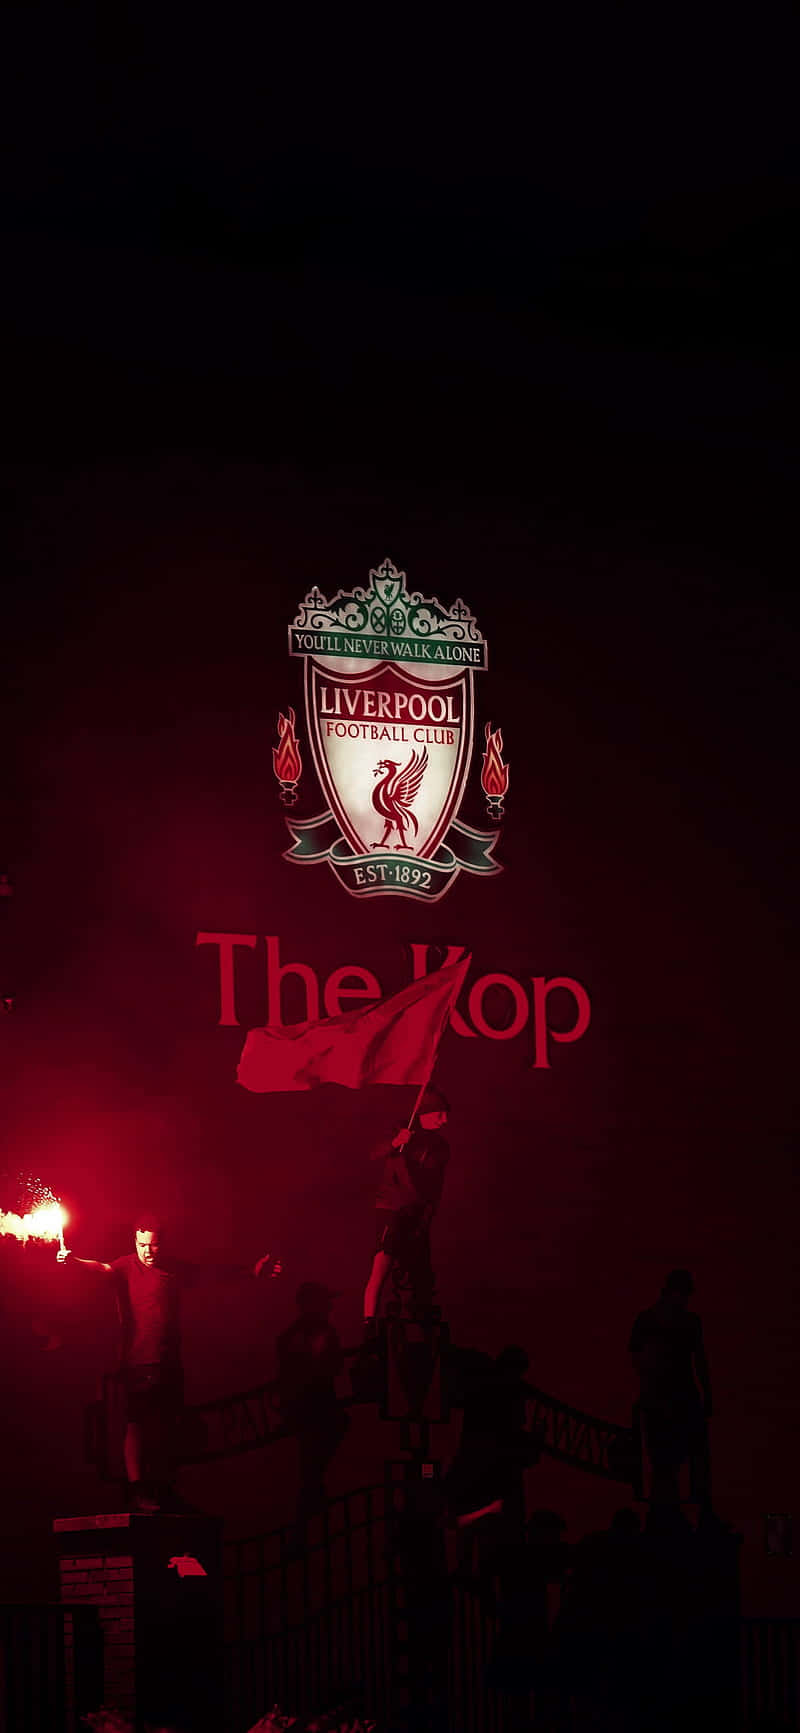 The Liverpool Iphone - Get it Now Wallpaper